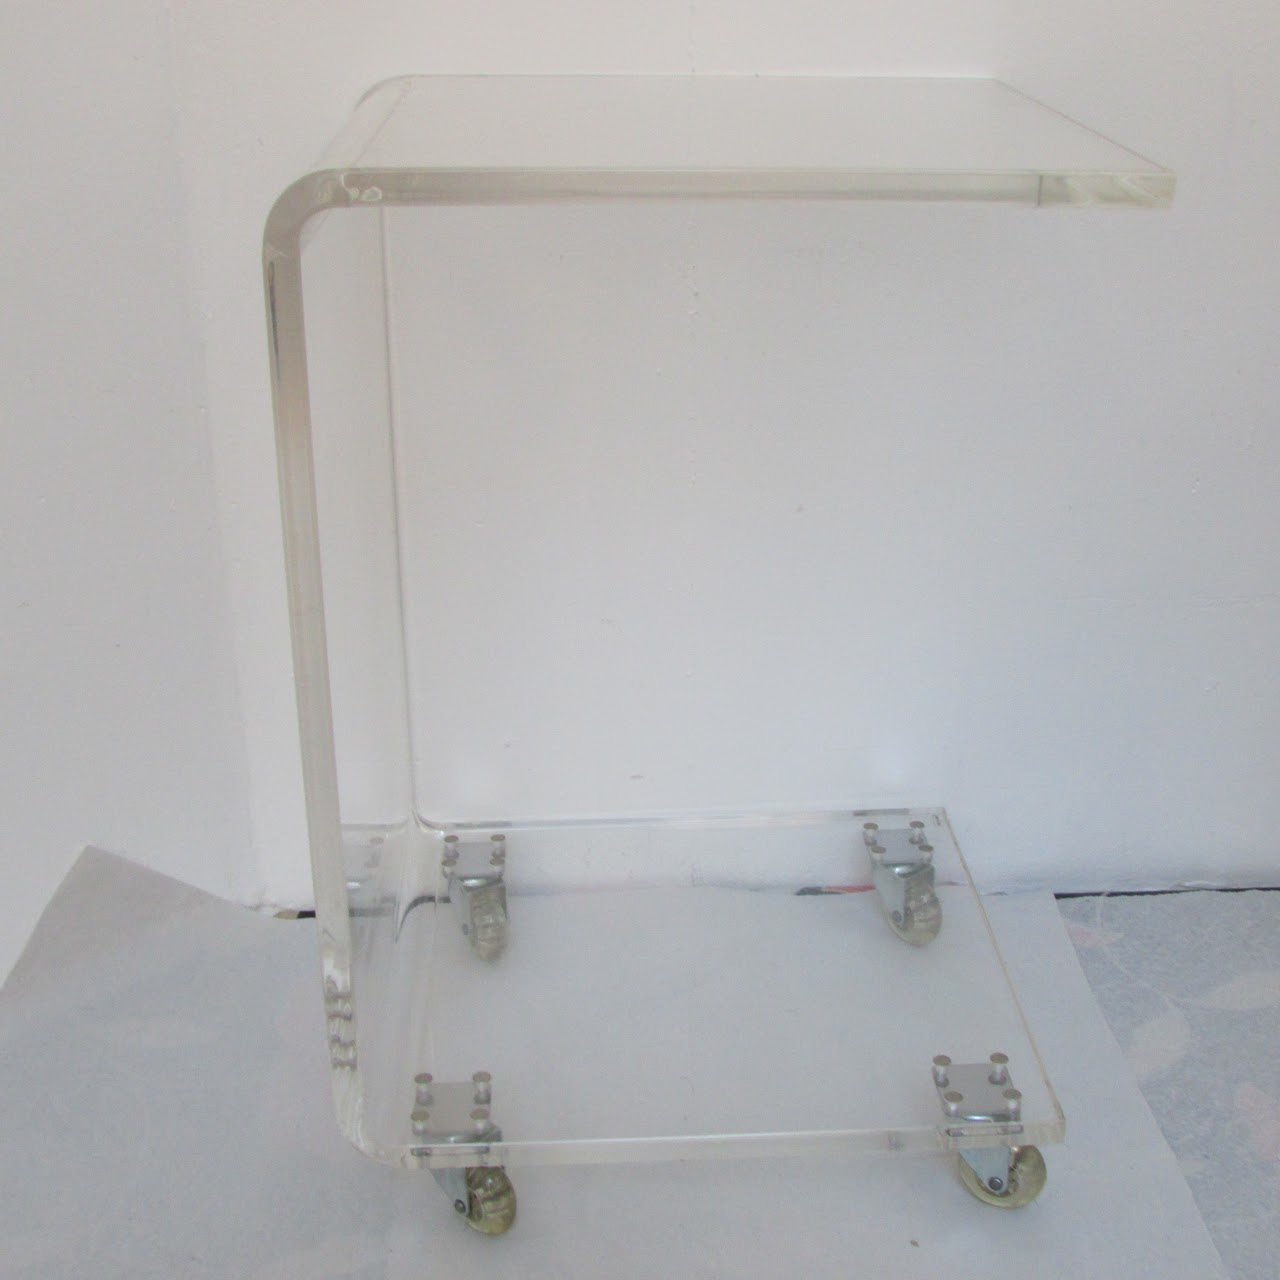 Acrylic C-Tiered Side Table